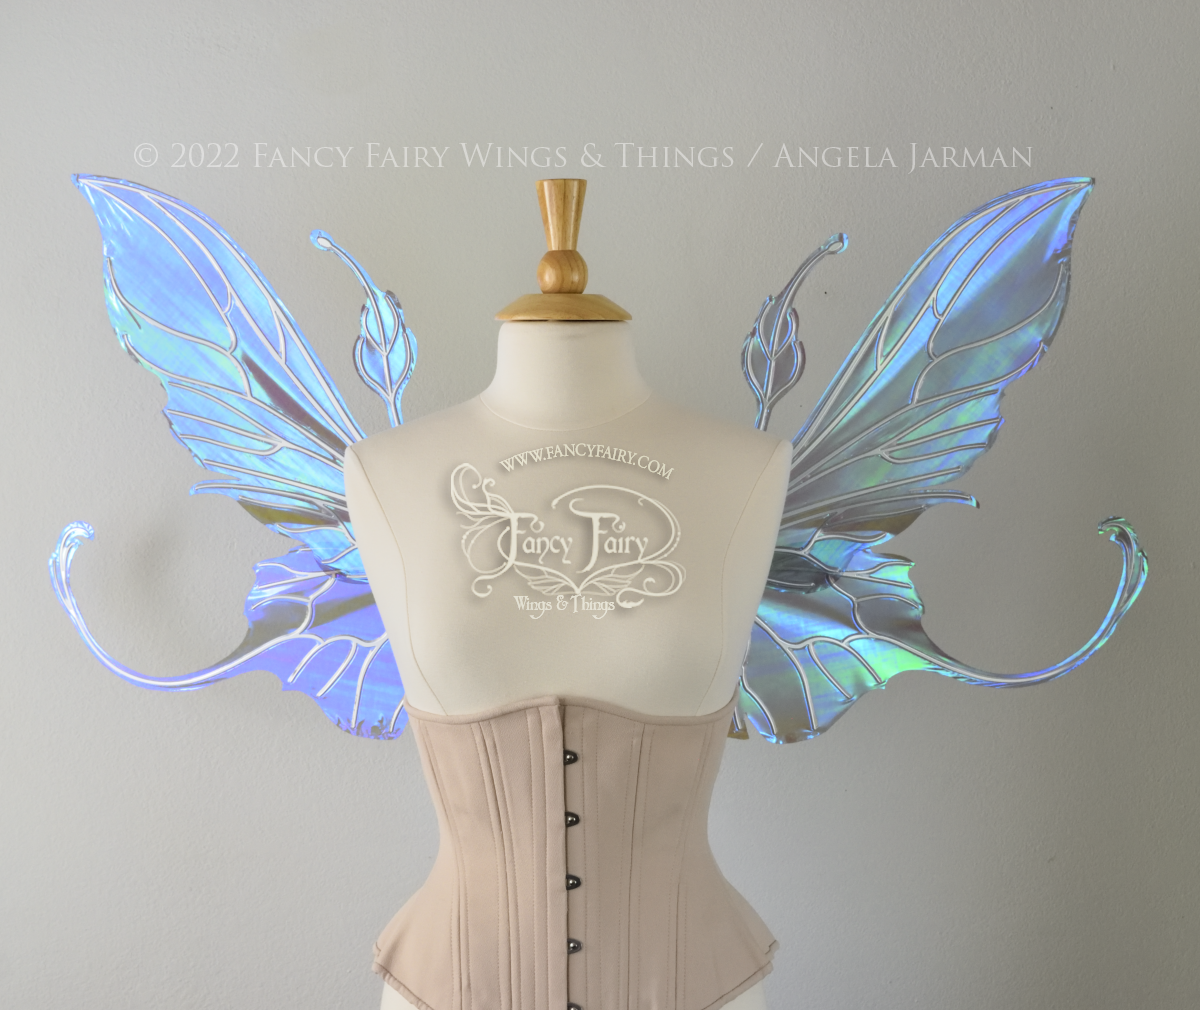 Front view of an ivory dress form wearing an alabaster underbust corset & large purple/blue iridescent fairy wings with elongated upper panels & antennae with bottom panels that have a tail curving upwards, silver veins